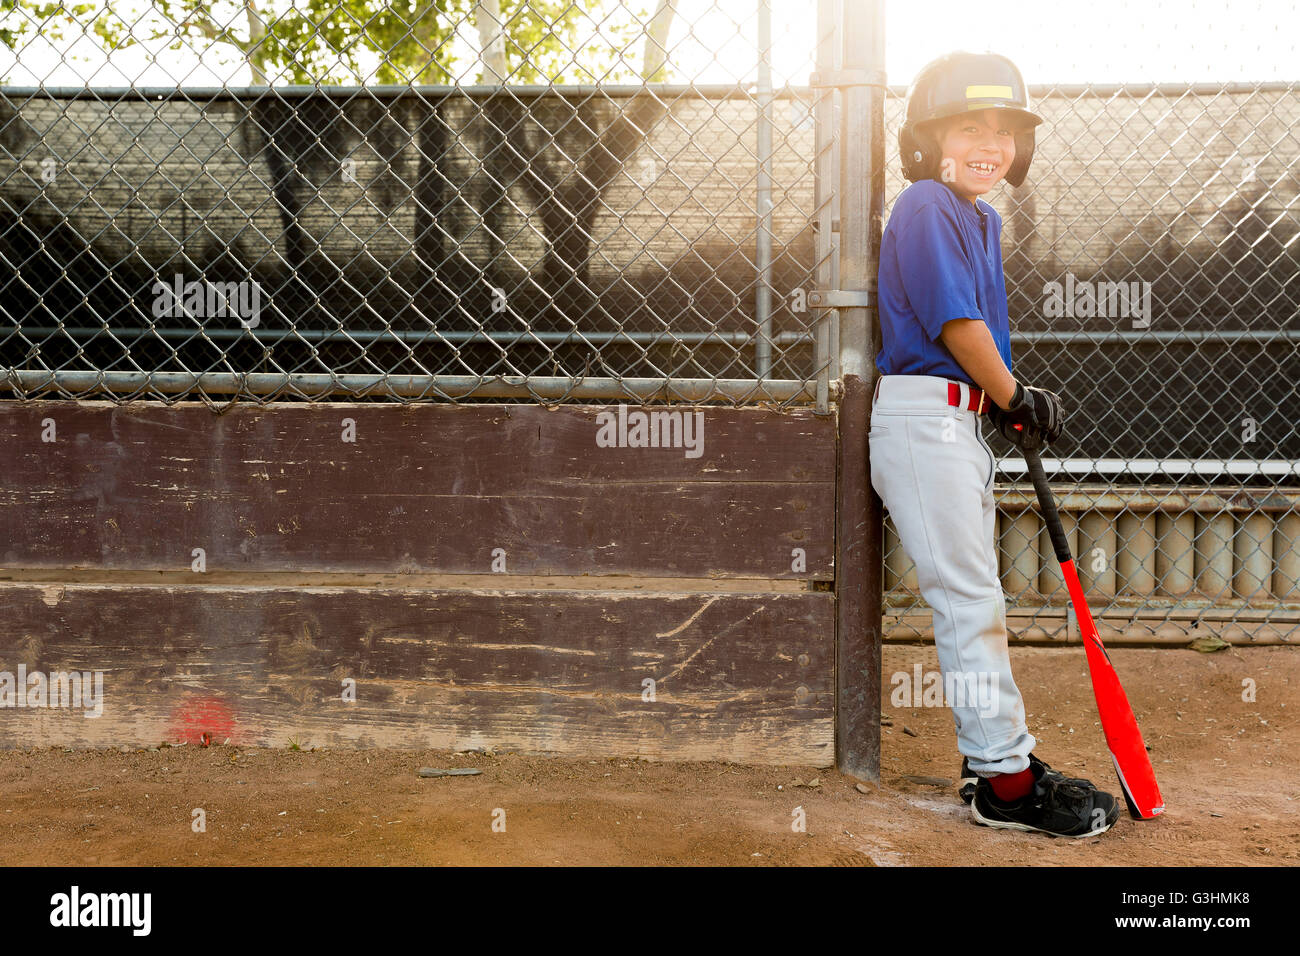 Portrait of boy leaning against fence at baseball practise Stock Photo